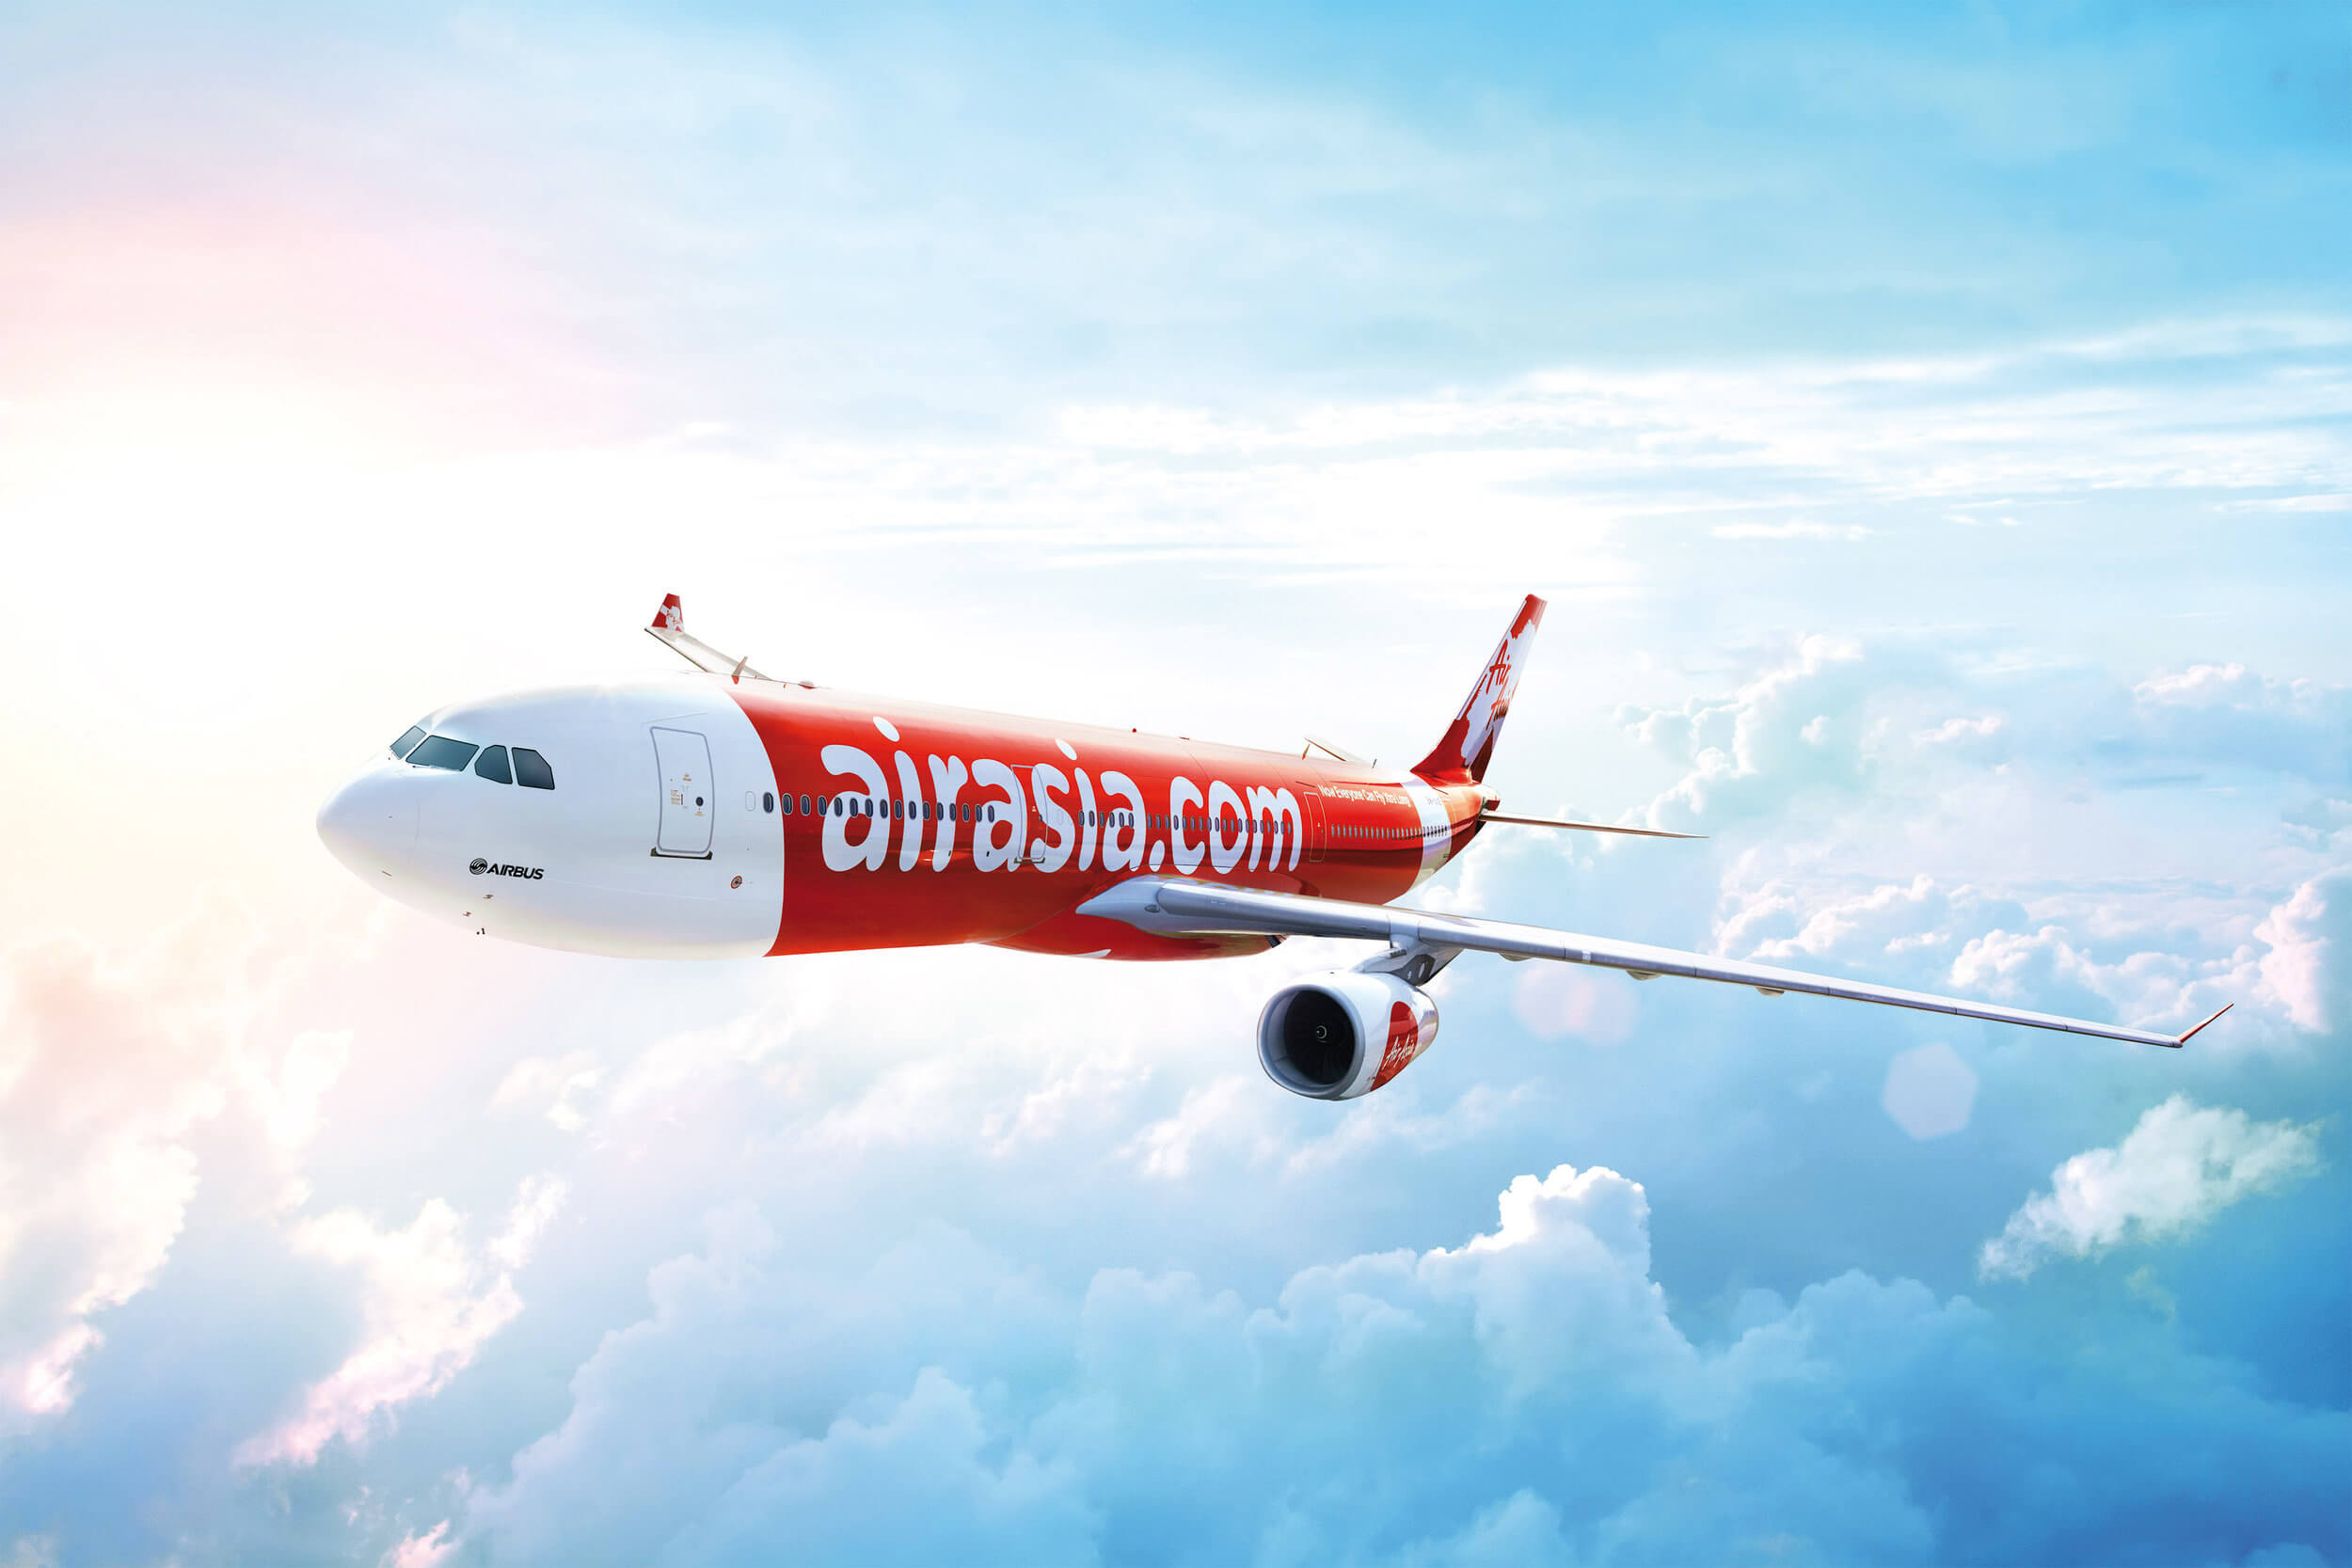 AirAsia set to take over Malaysia Airlines, reports suggest